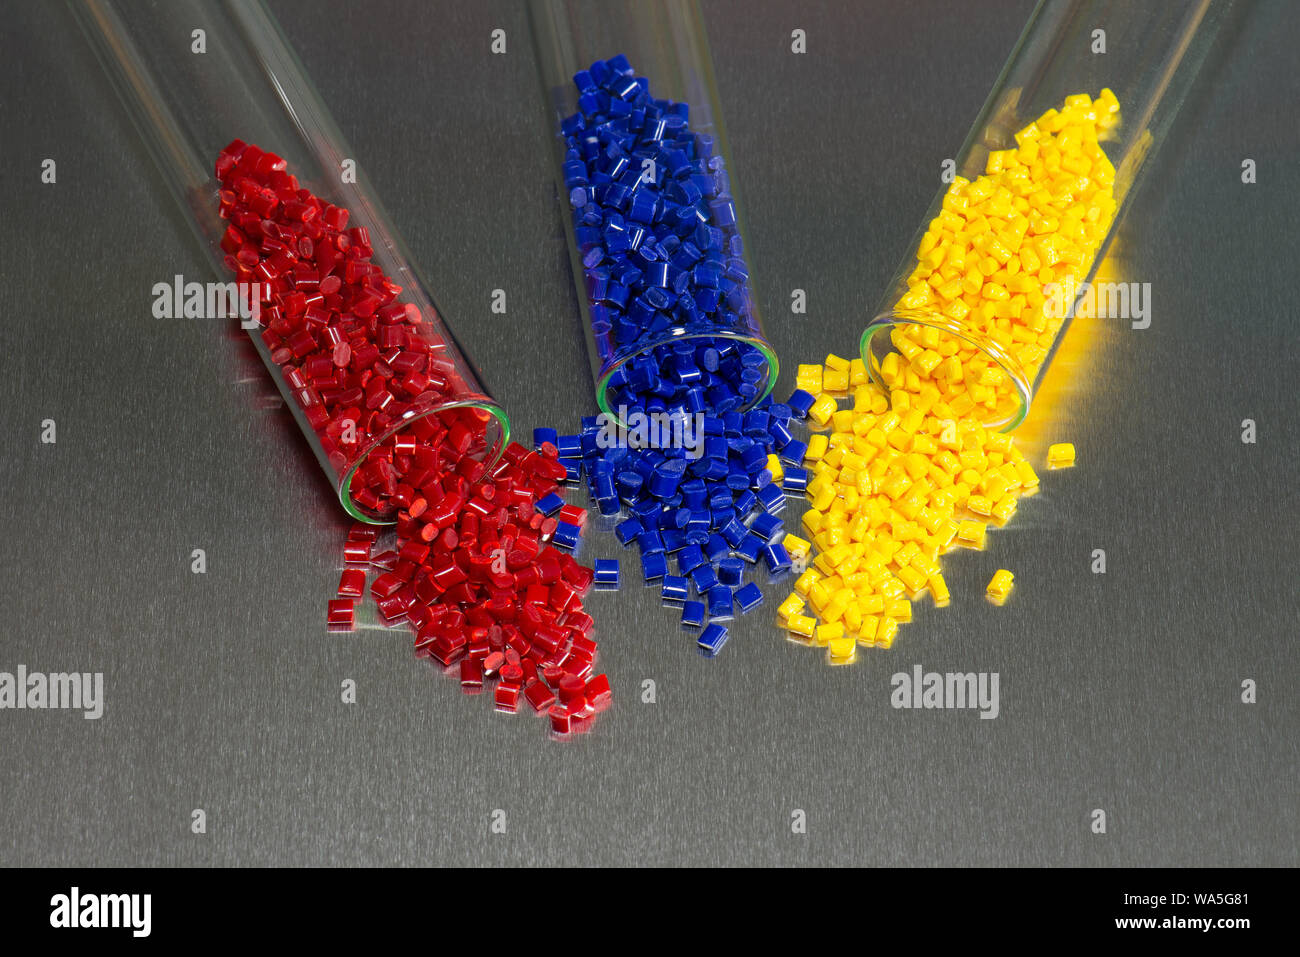 blue, red and yellow polymer resin in laboratory on metal plate Stock Photo